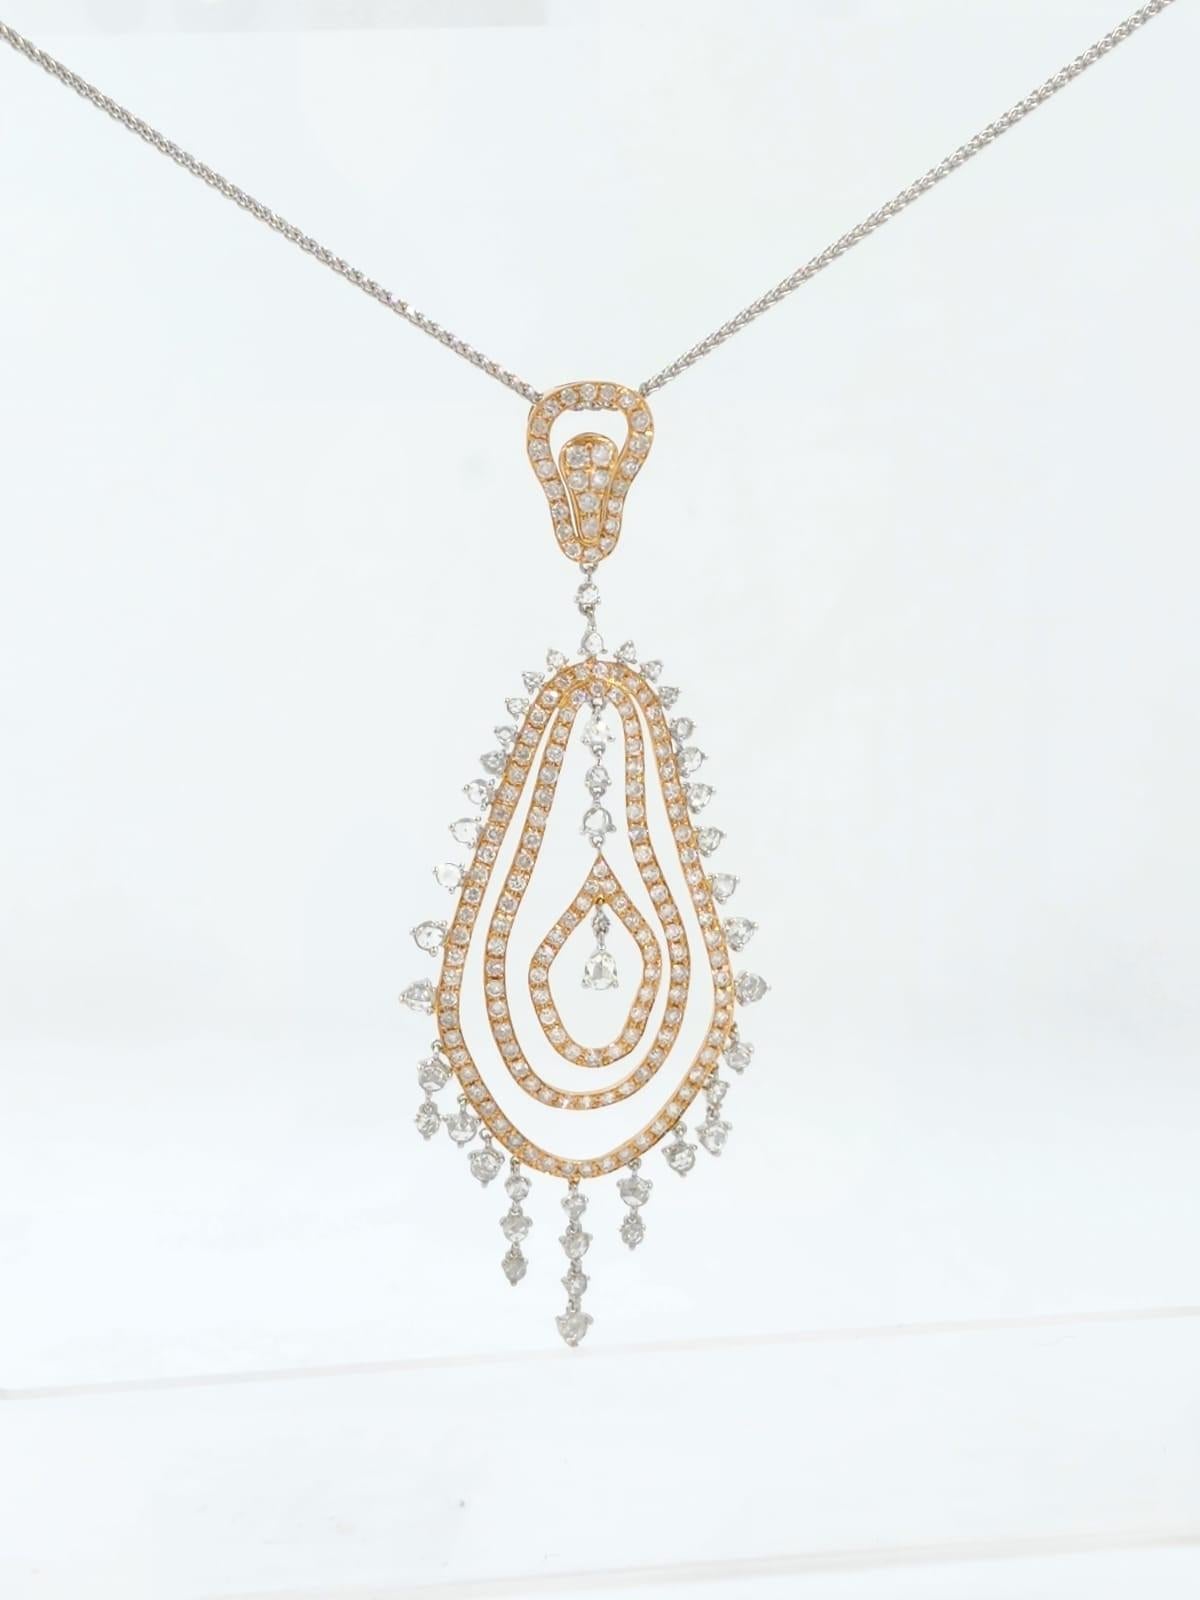 This necklace feature 1.40 carat of rose cut diamonds and 2.00 carat of white round diamonds. Necklace is set in 18 karat rose gold and white gold.  Great for everyday use and would make a wonderful gift ! 
Length of chain : 16 inch
Pendant diameter